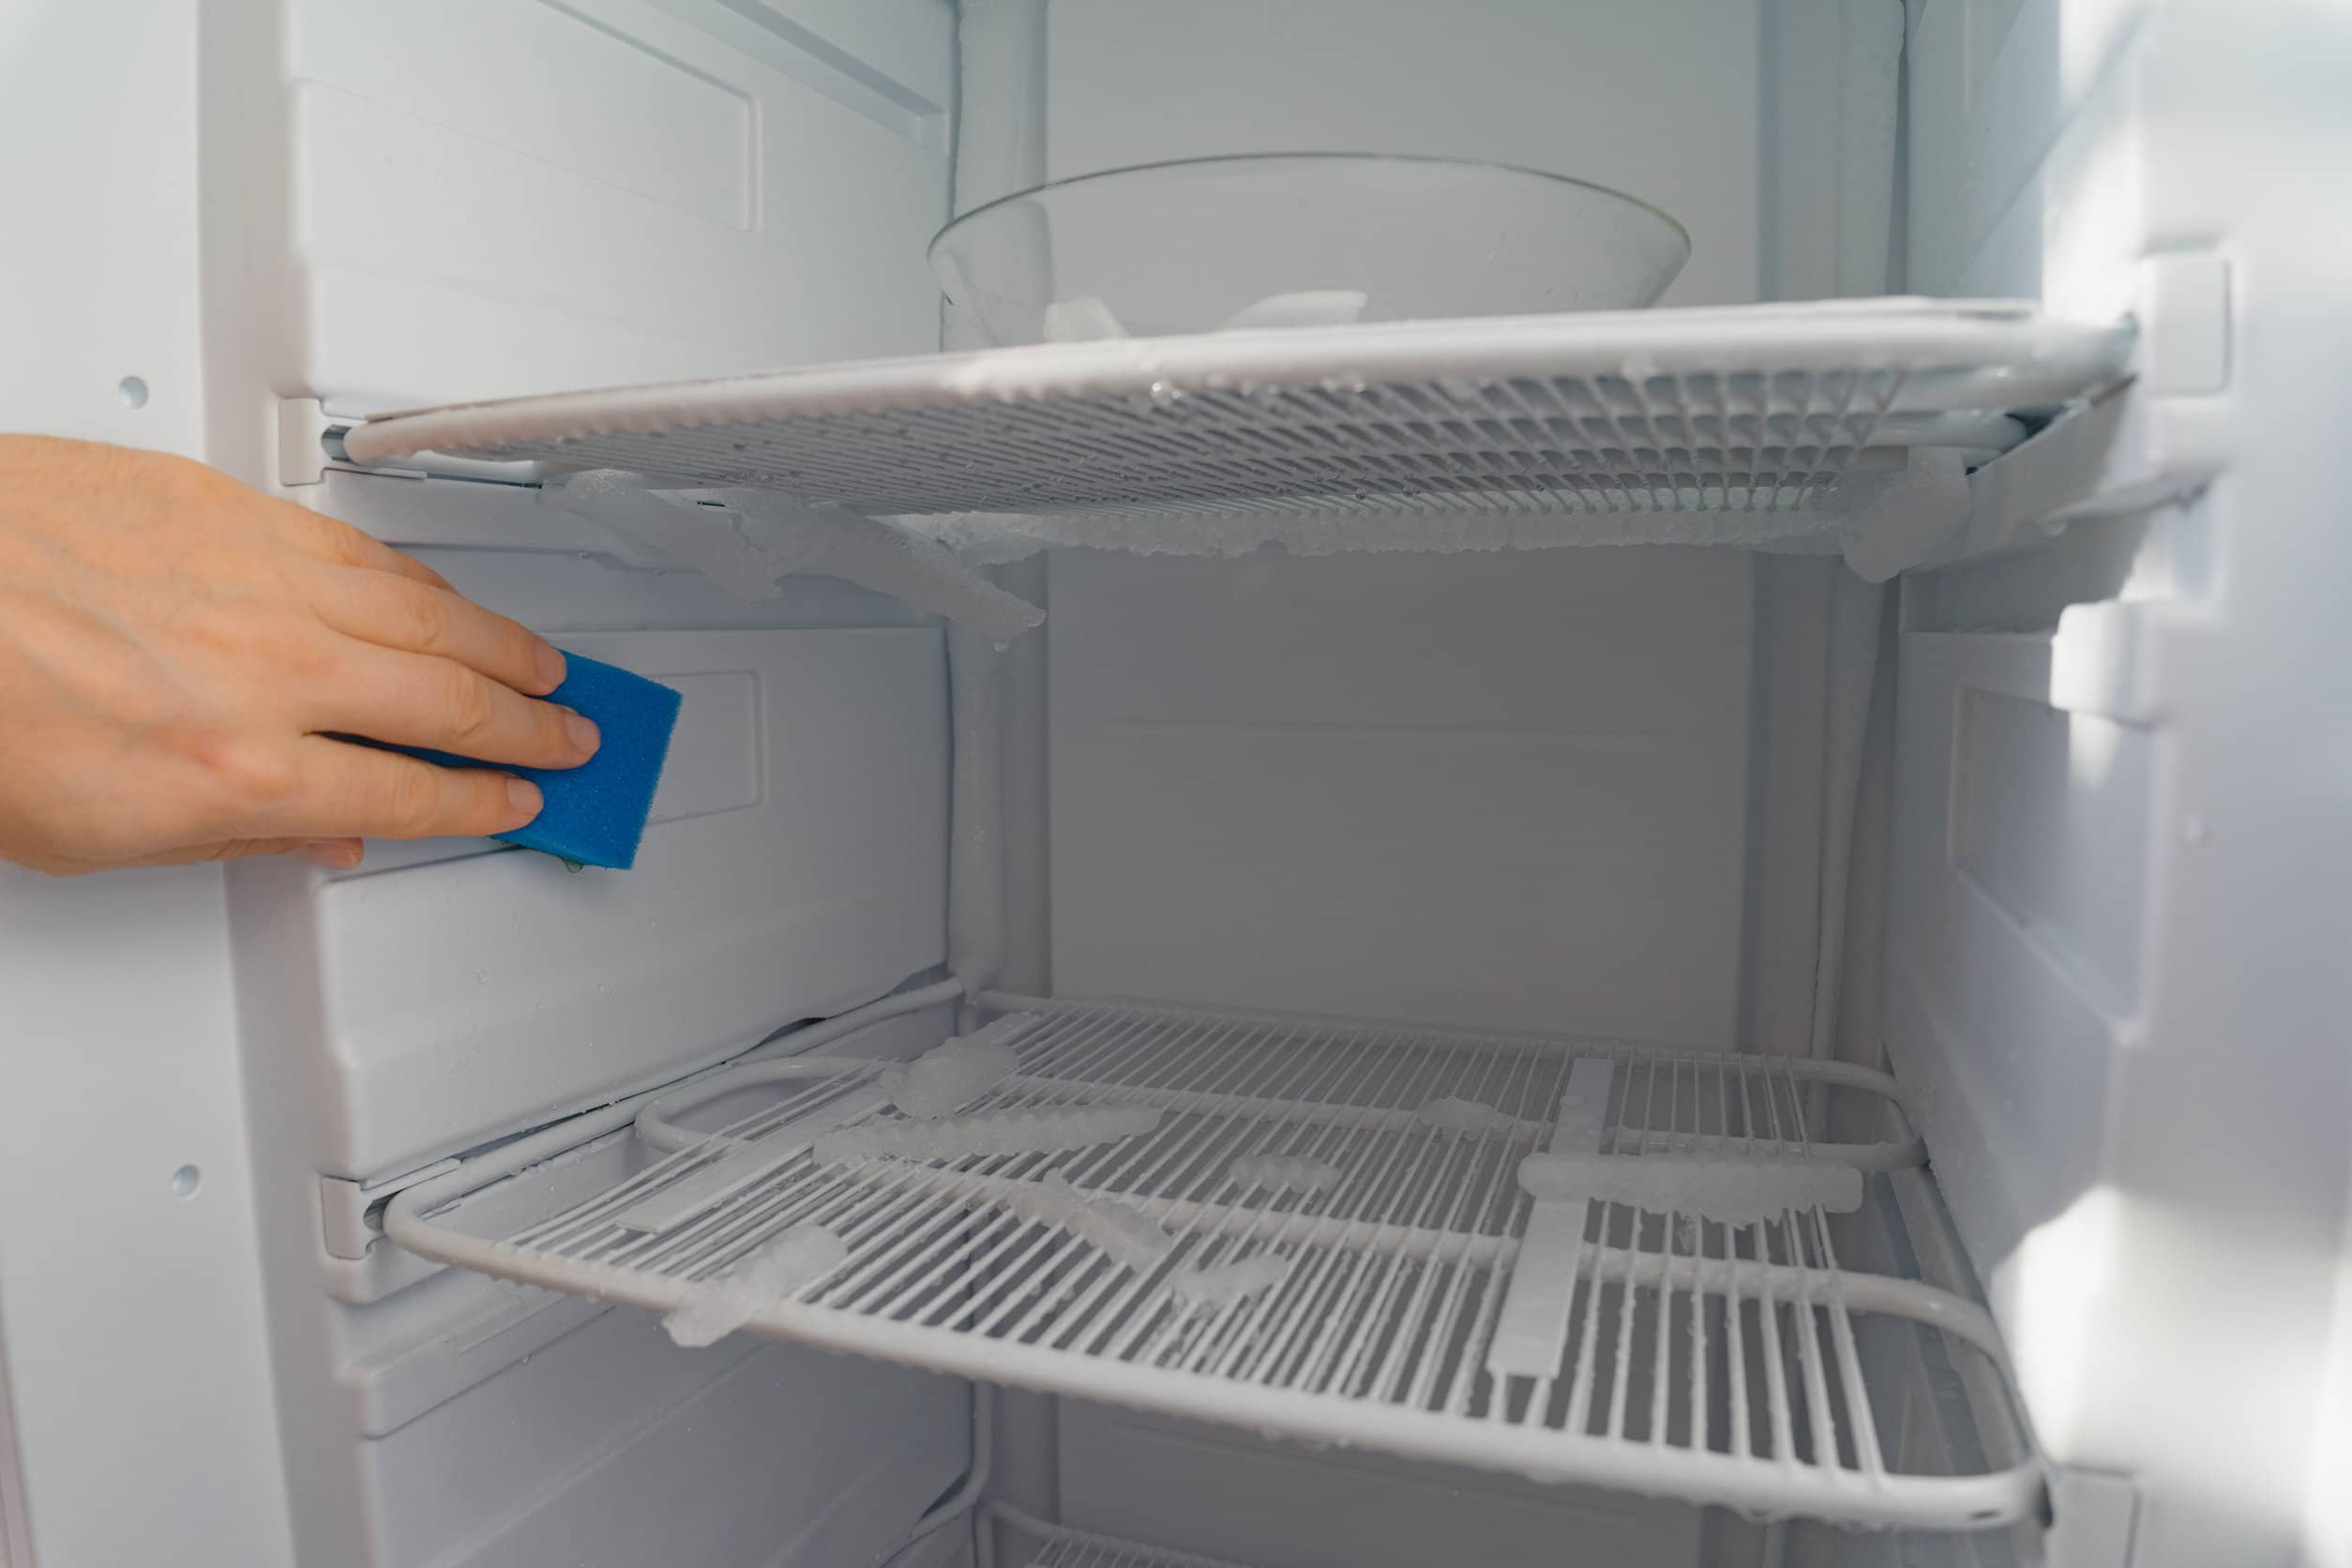 How To Defrost Fridge Freezer Without Turning It Off